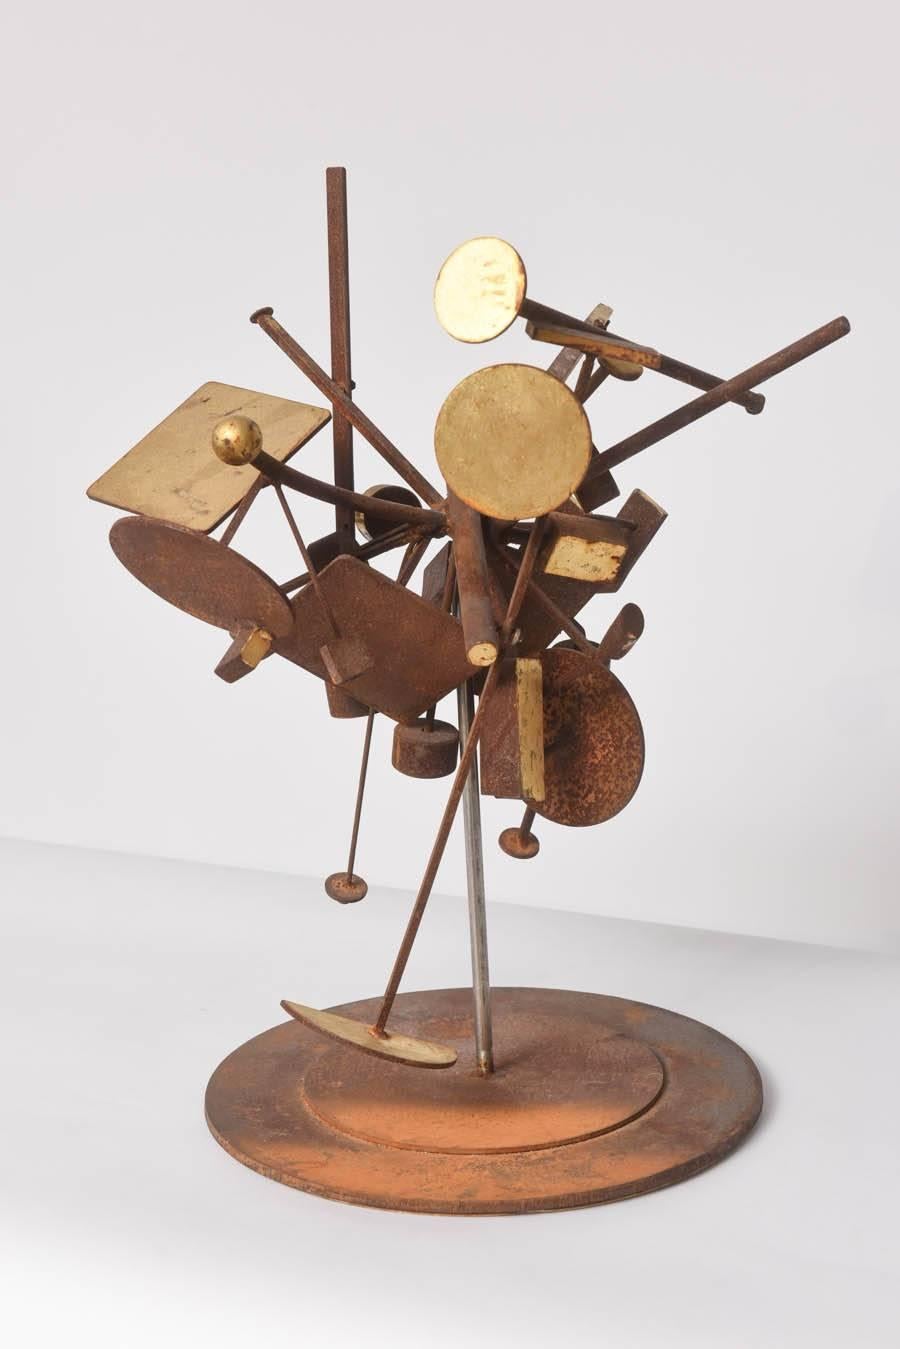 Perfectly and auspiciously whimsical. Iron and gold leaf kinetic sculpture, in abstract form -a tabletop sculpture. The sculpture is in excellent original condition.

In the style of Mathias Goeritz, Elayna Toby Singer, Harry Bertoia, Louise